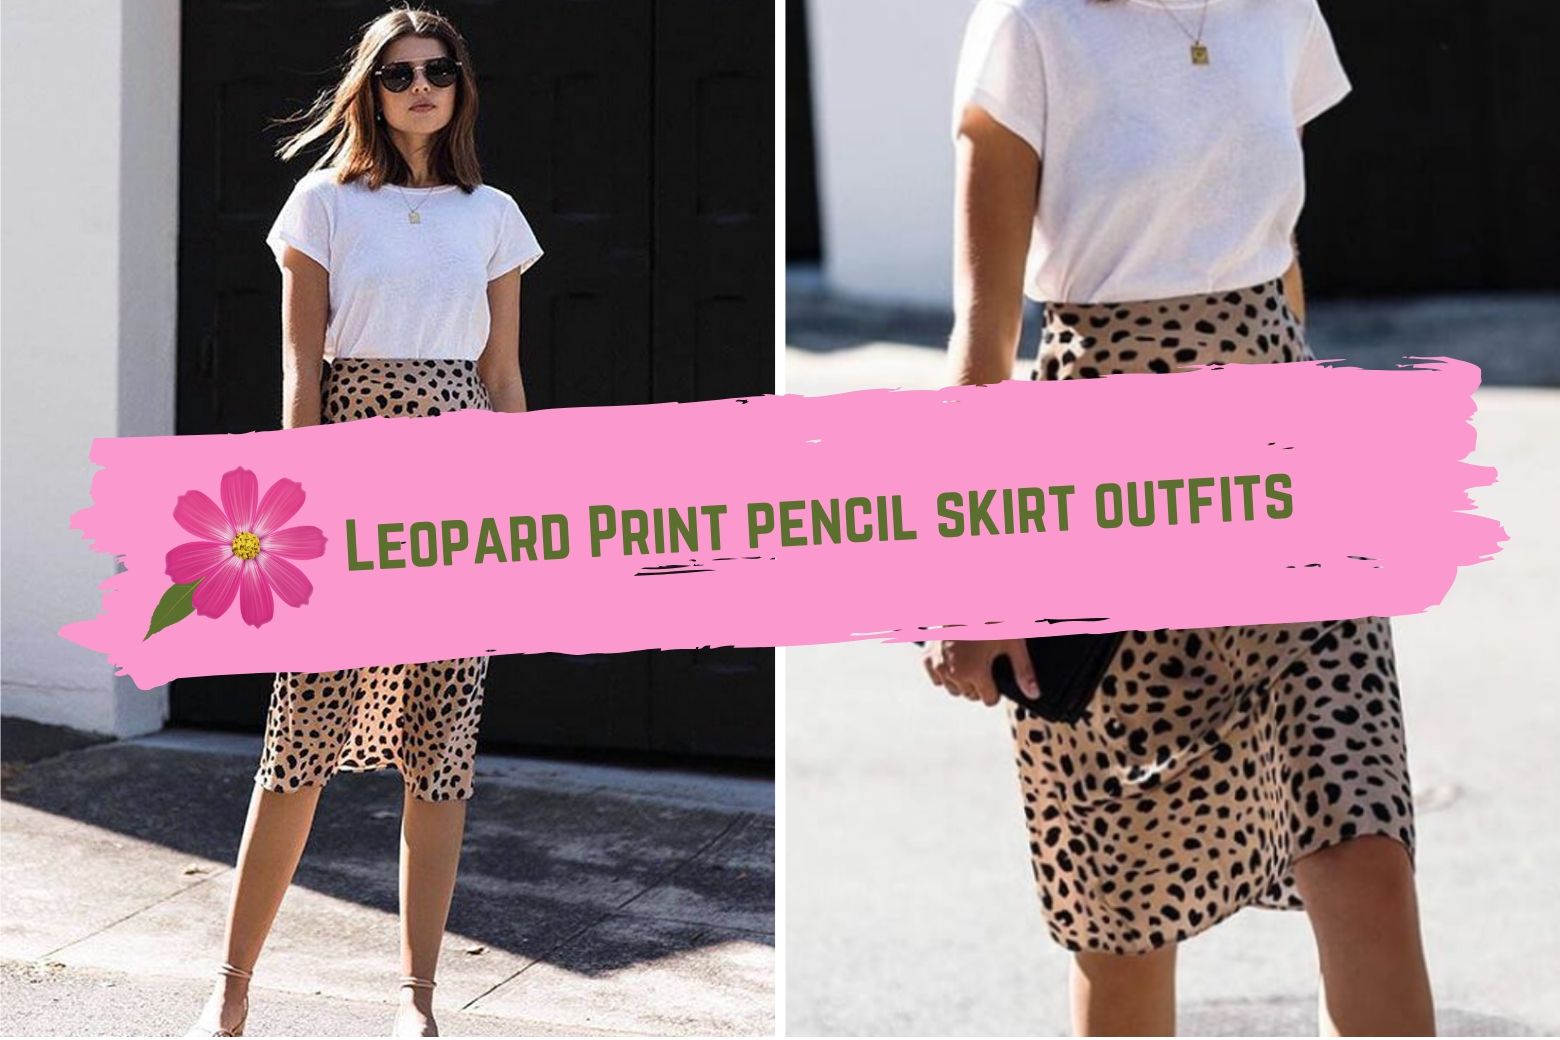 leopard print pencil skirt outfits